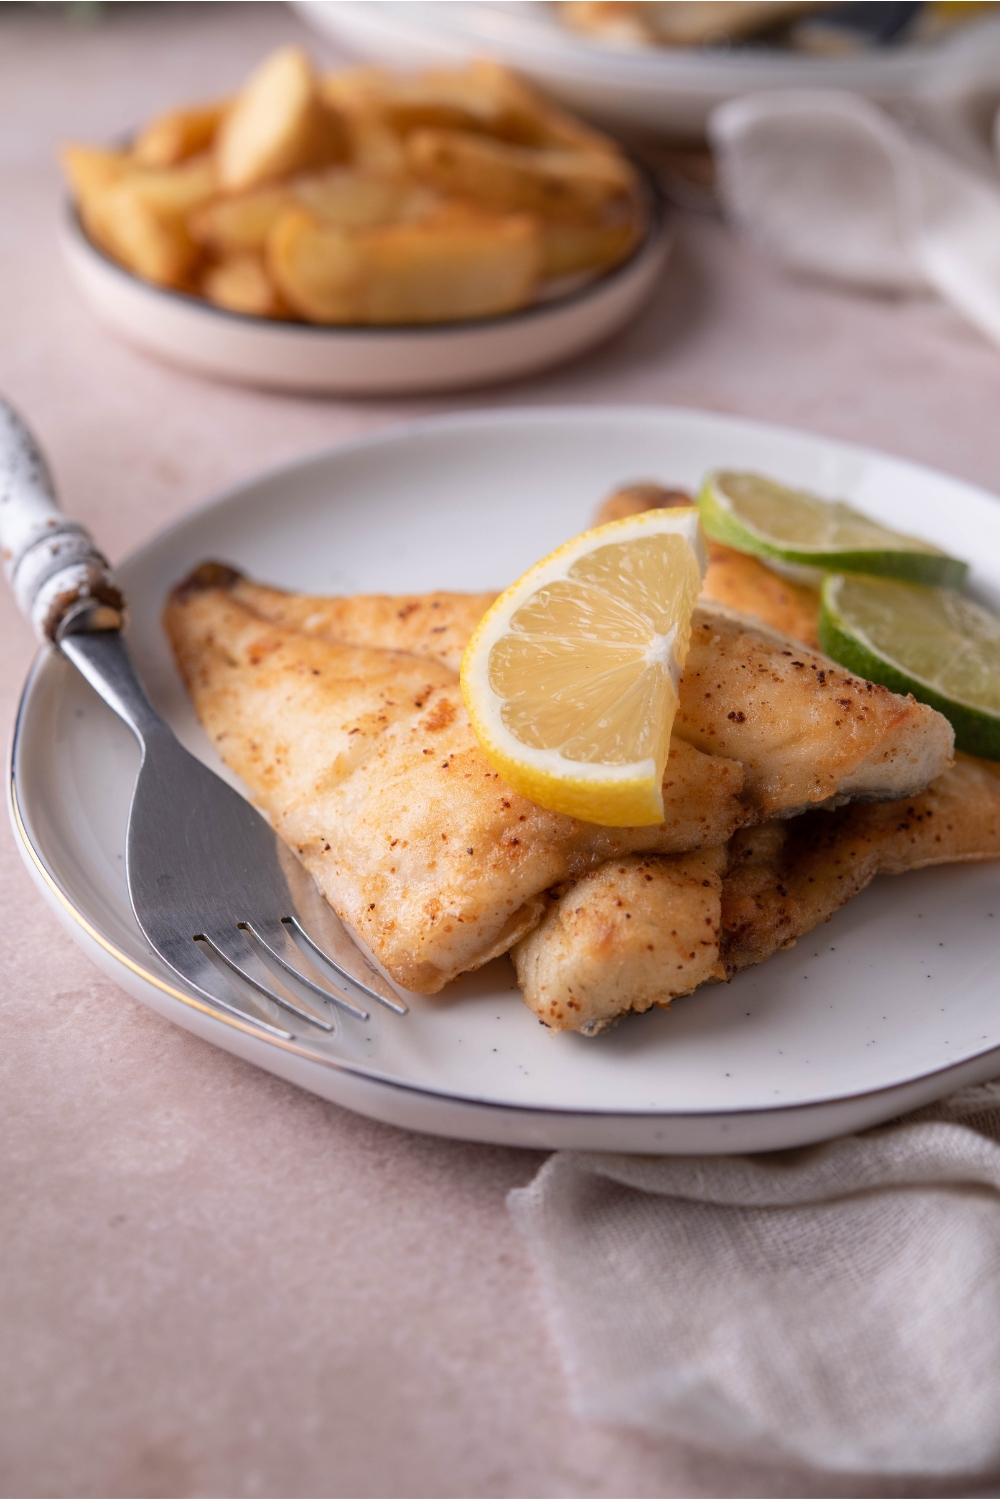 Two pan-fried tilapia fillets plated on top of each other on a white plate, each garnished with a sliced lemon and sliced lime. There is a fork on the plate and a plate of potato wedges in the background.